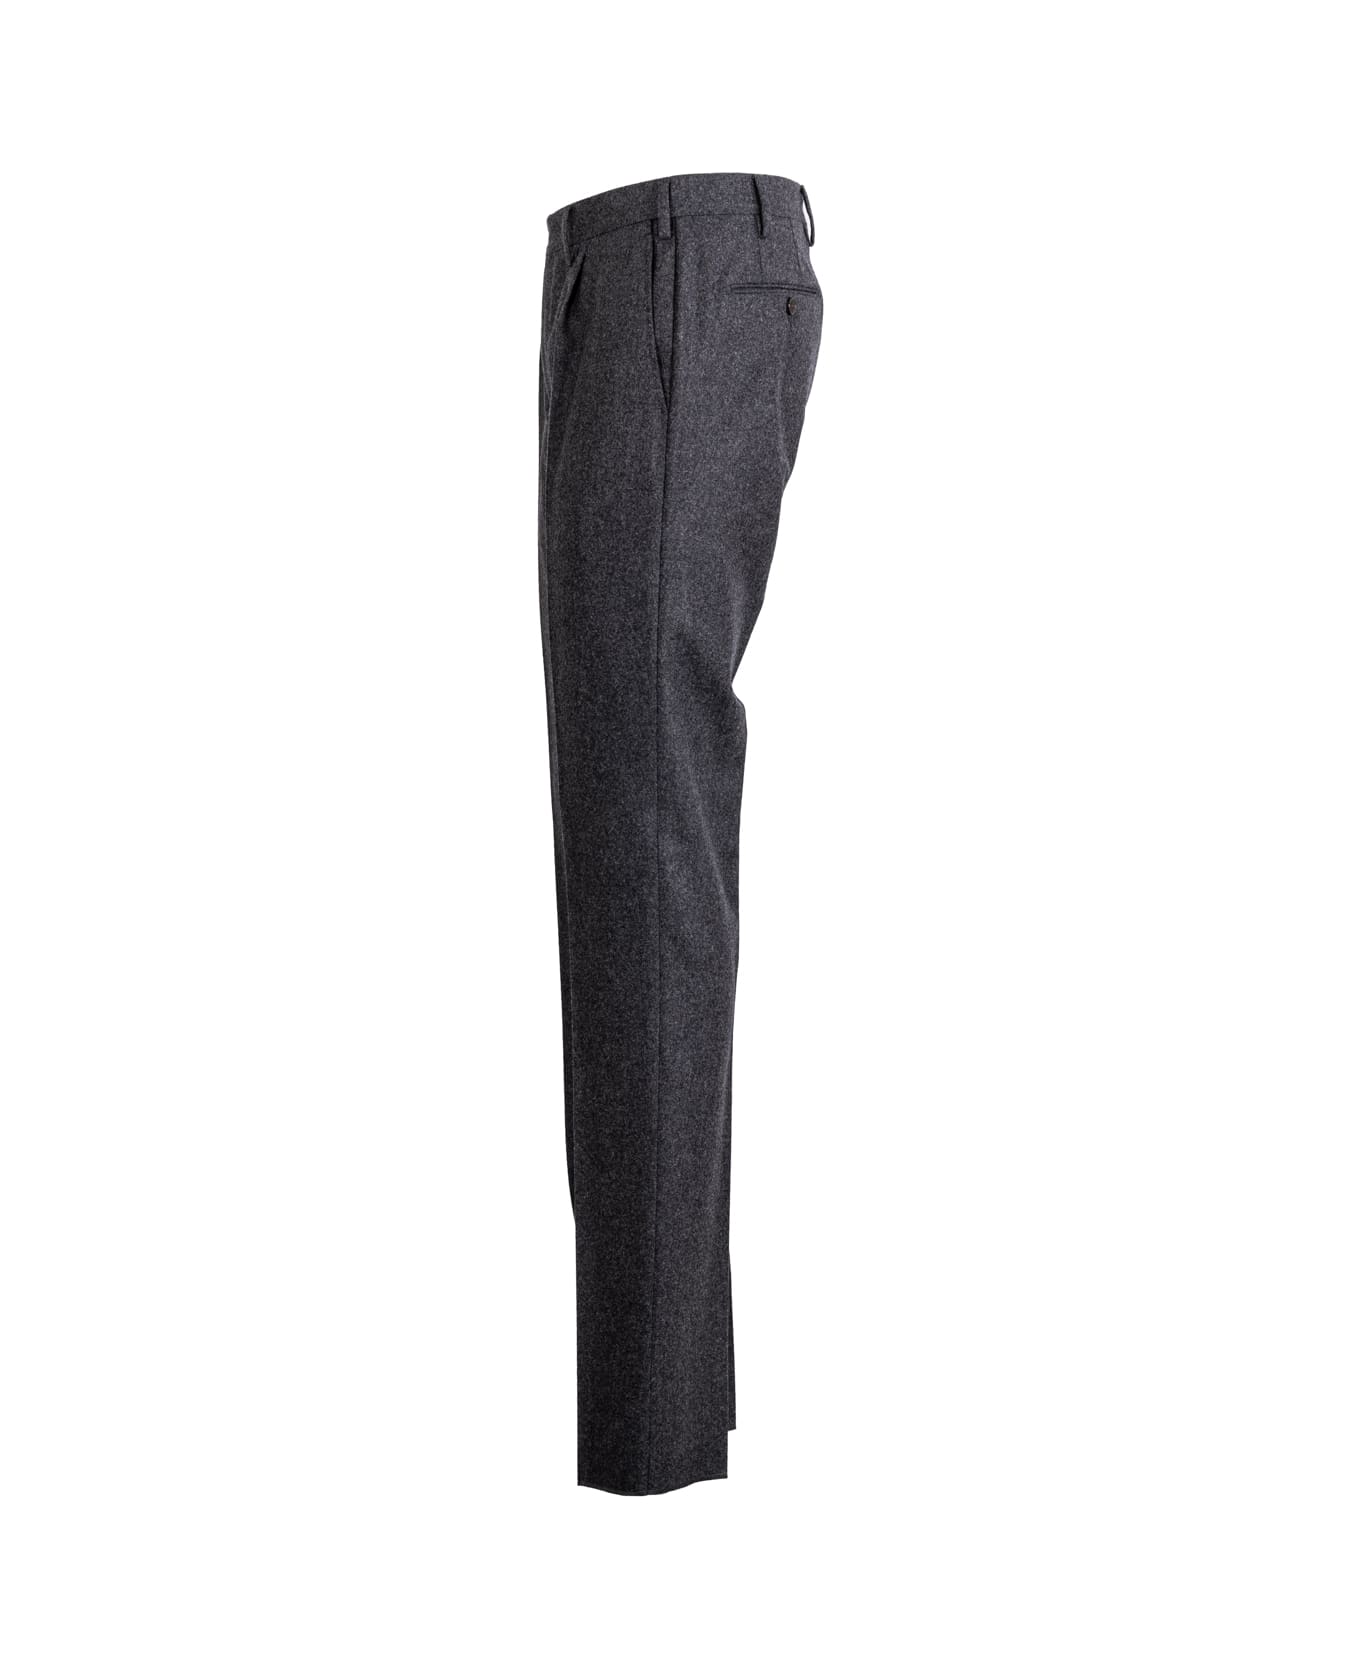 Germano Zama Germano Trousers Anthracite - Anthracite